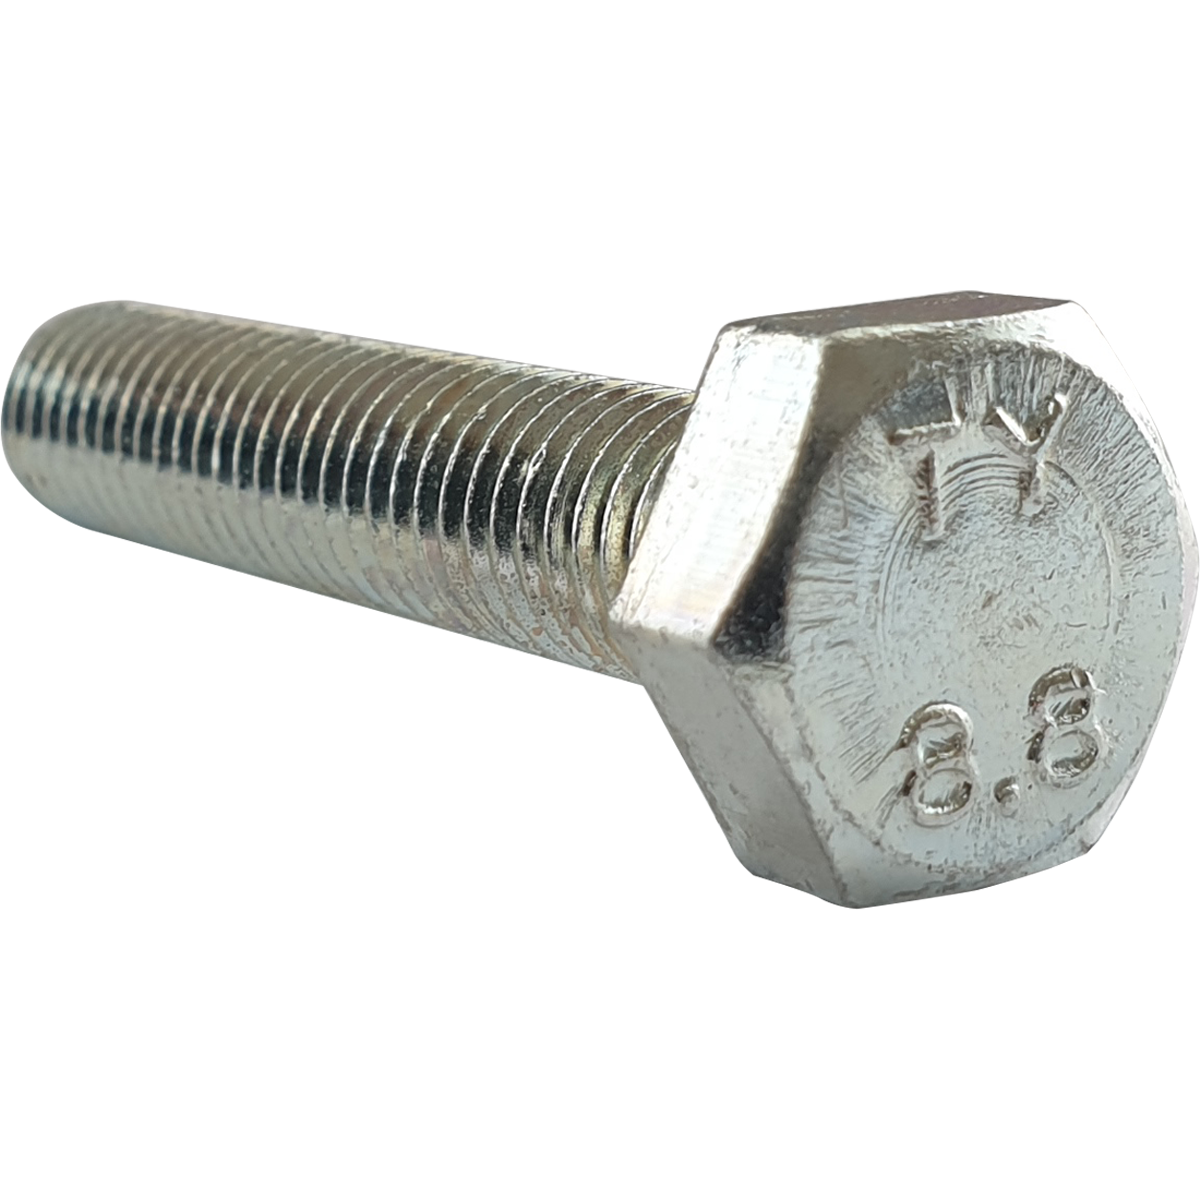 Metric BZP fully threaded hex set screws. Also known as fully threaded bolts and widely used in mechanical and engineering applications